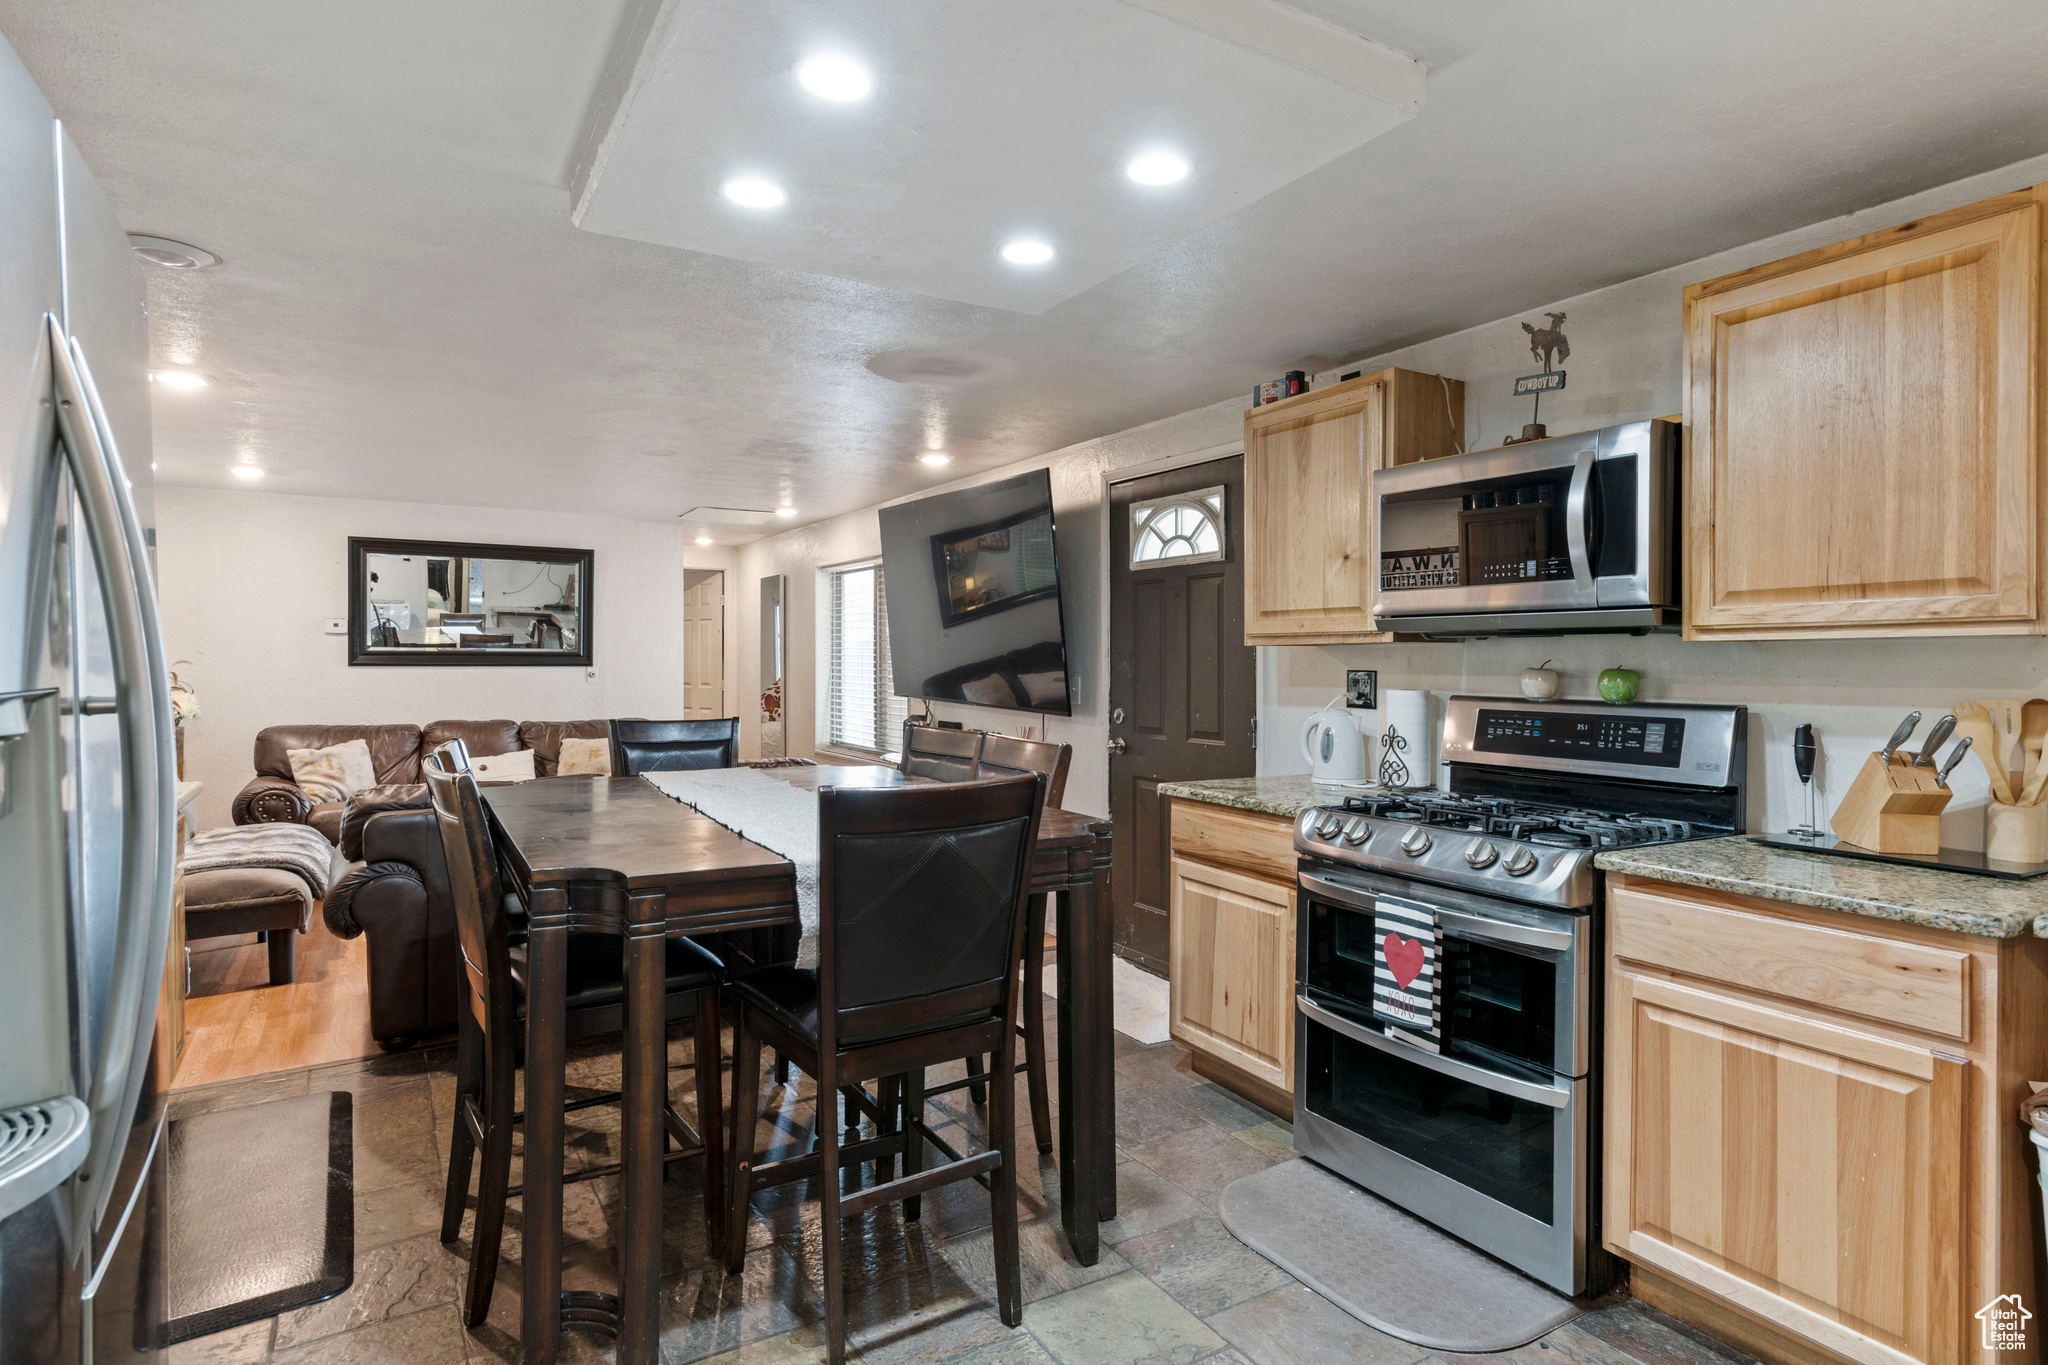 Kitchen with light brown cabinets, stainless steel appliances, light stone counters, and tile flooring